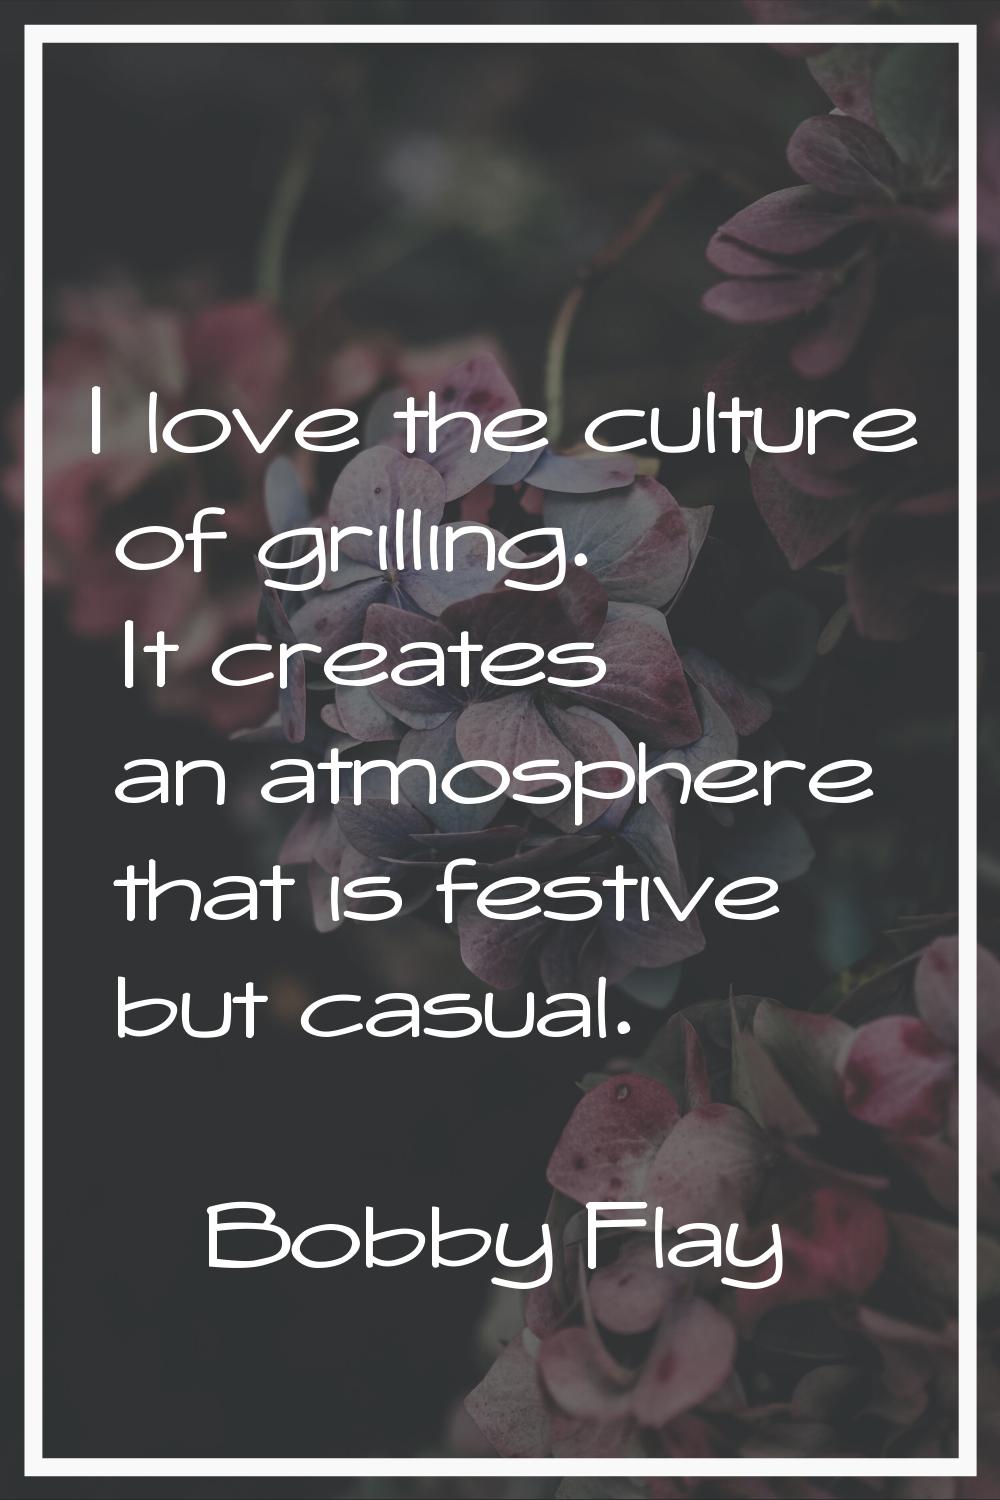 I love the culture of grilling. It creates an atmosphere that is festive but casual.